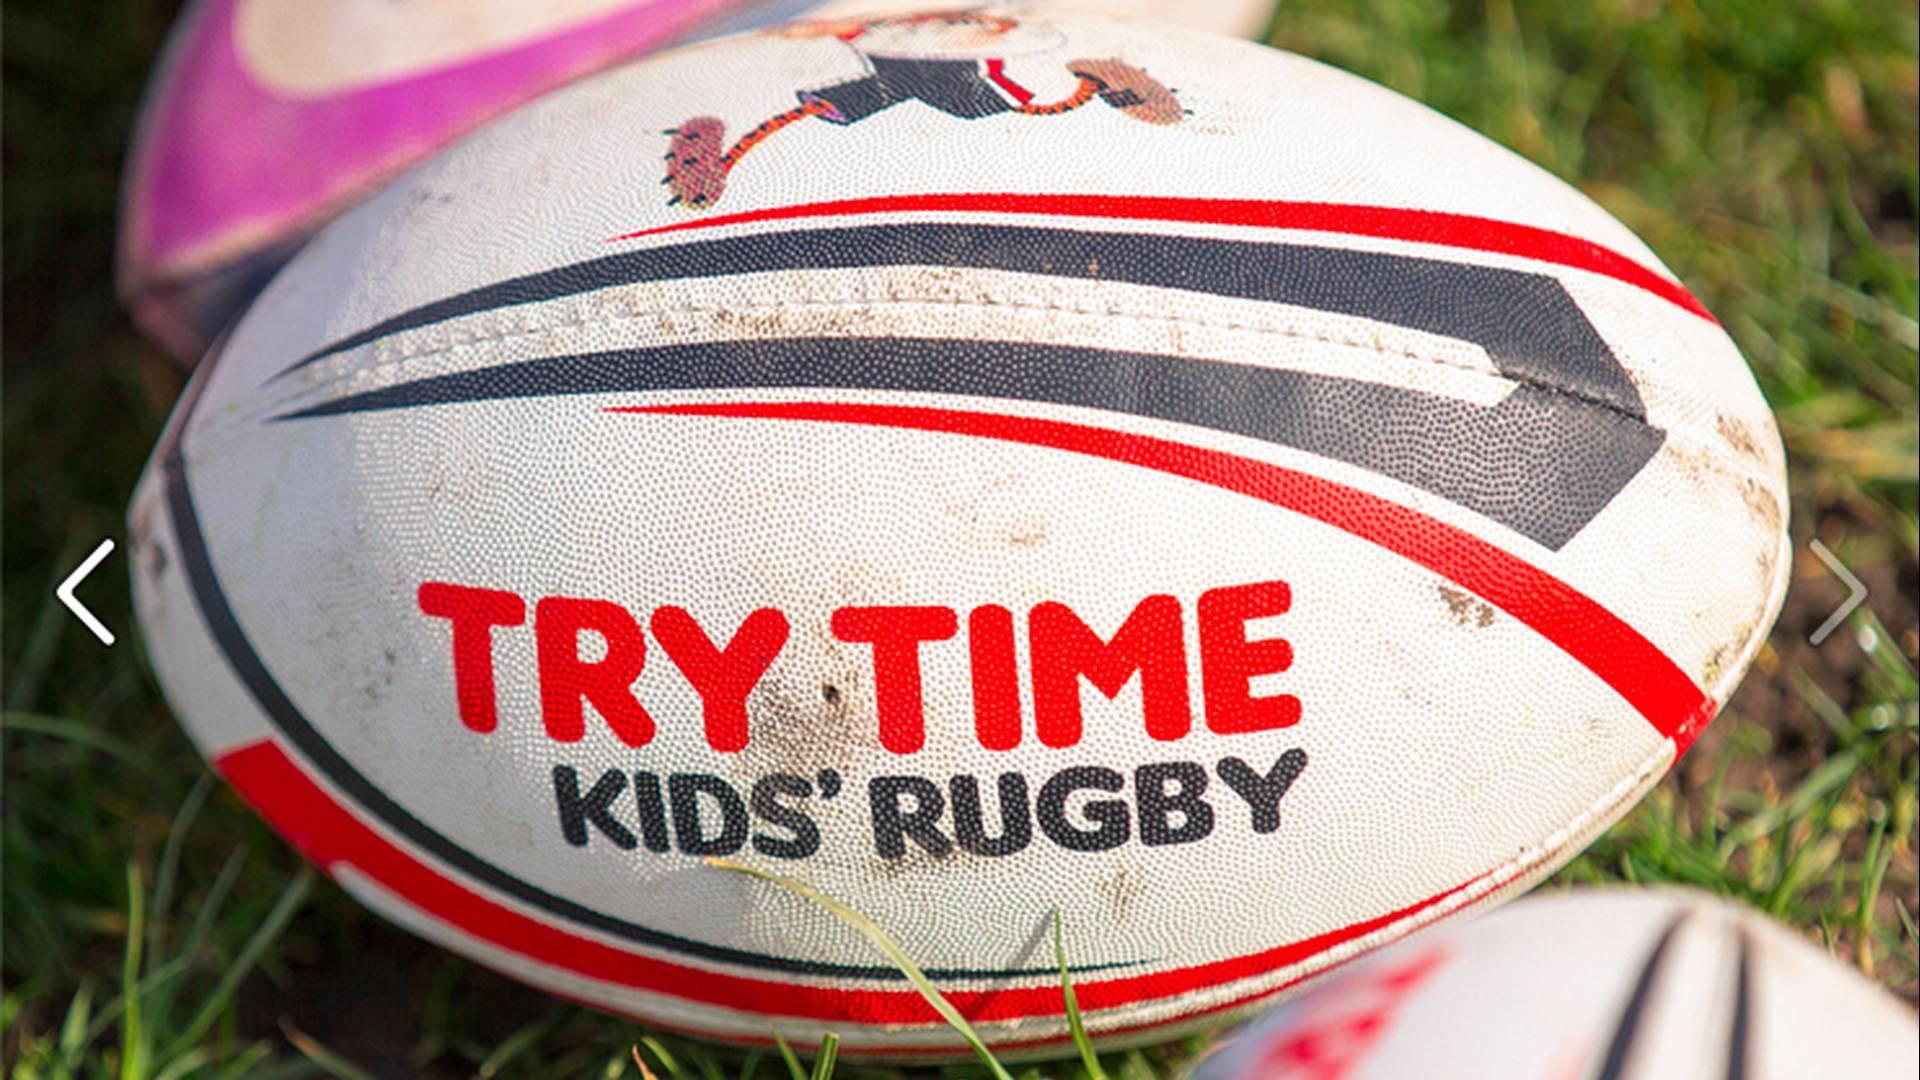 Try Time Kids Rugby photo